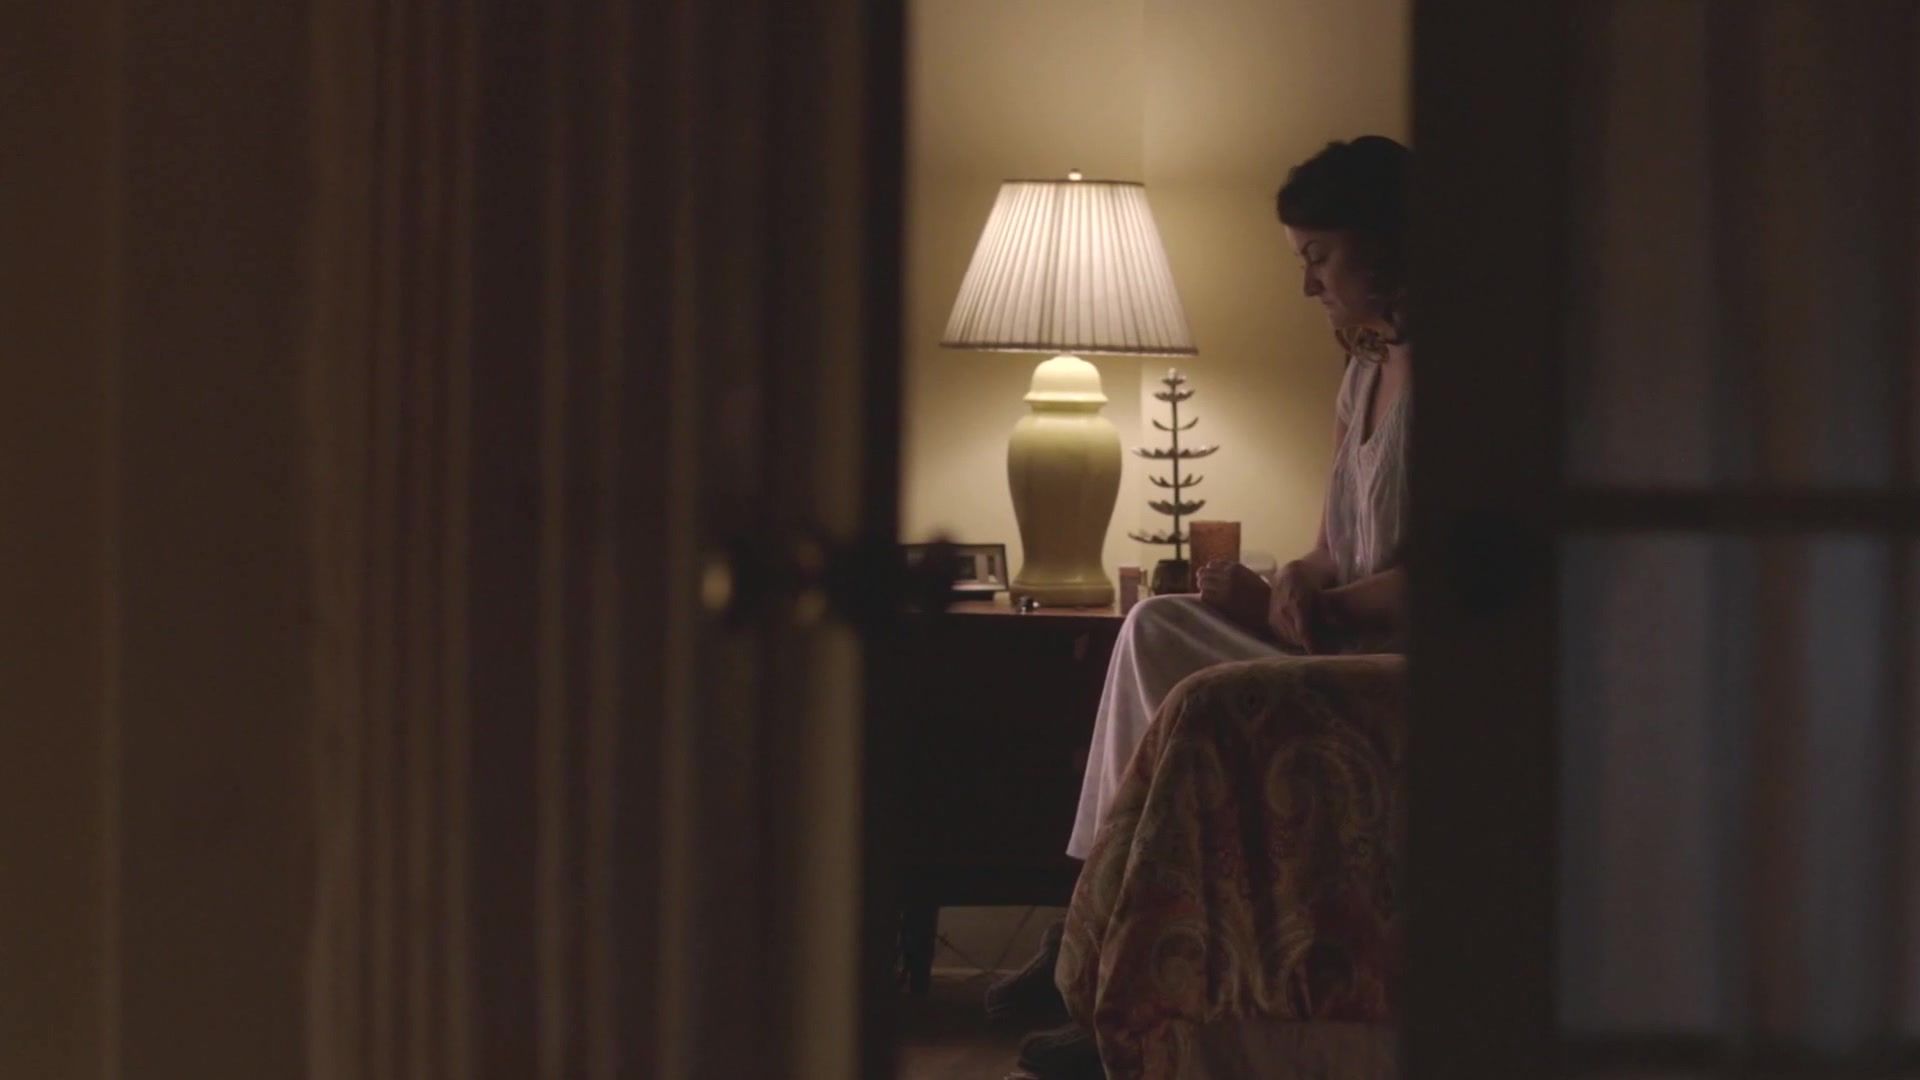 KindGirls Naked Keri Russell nude - The Americans S04E05 (2016) Hung - 2